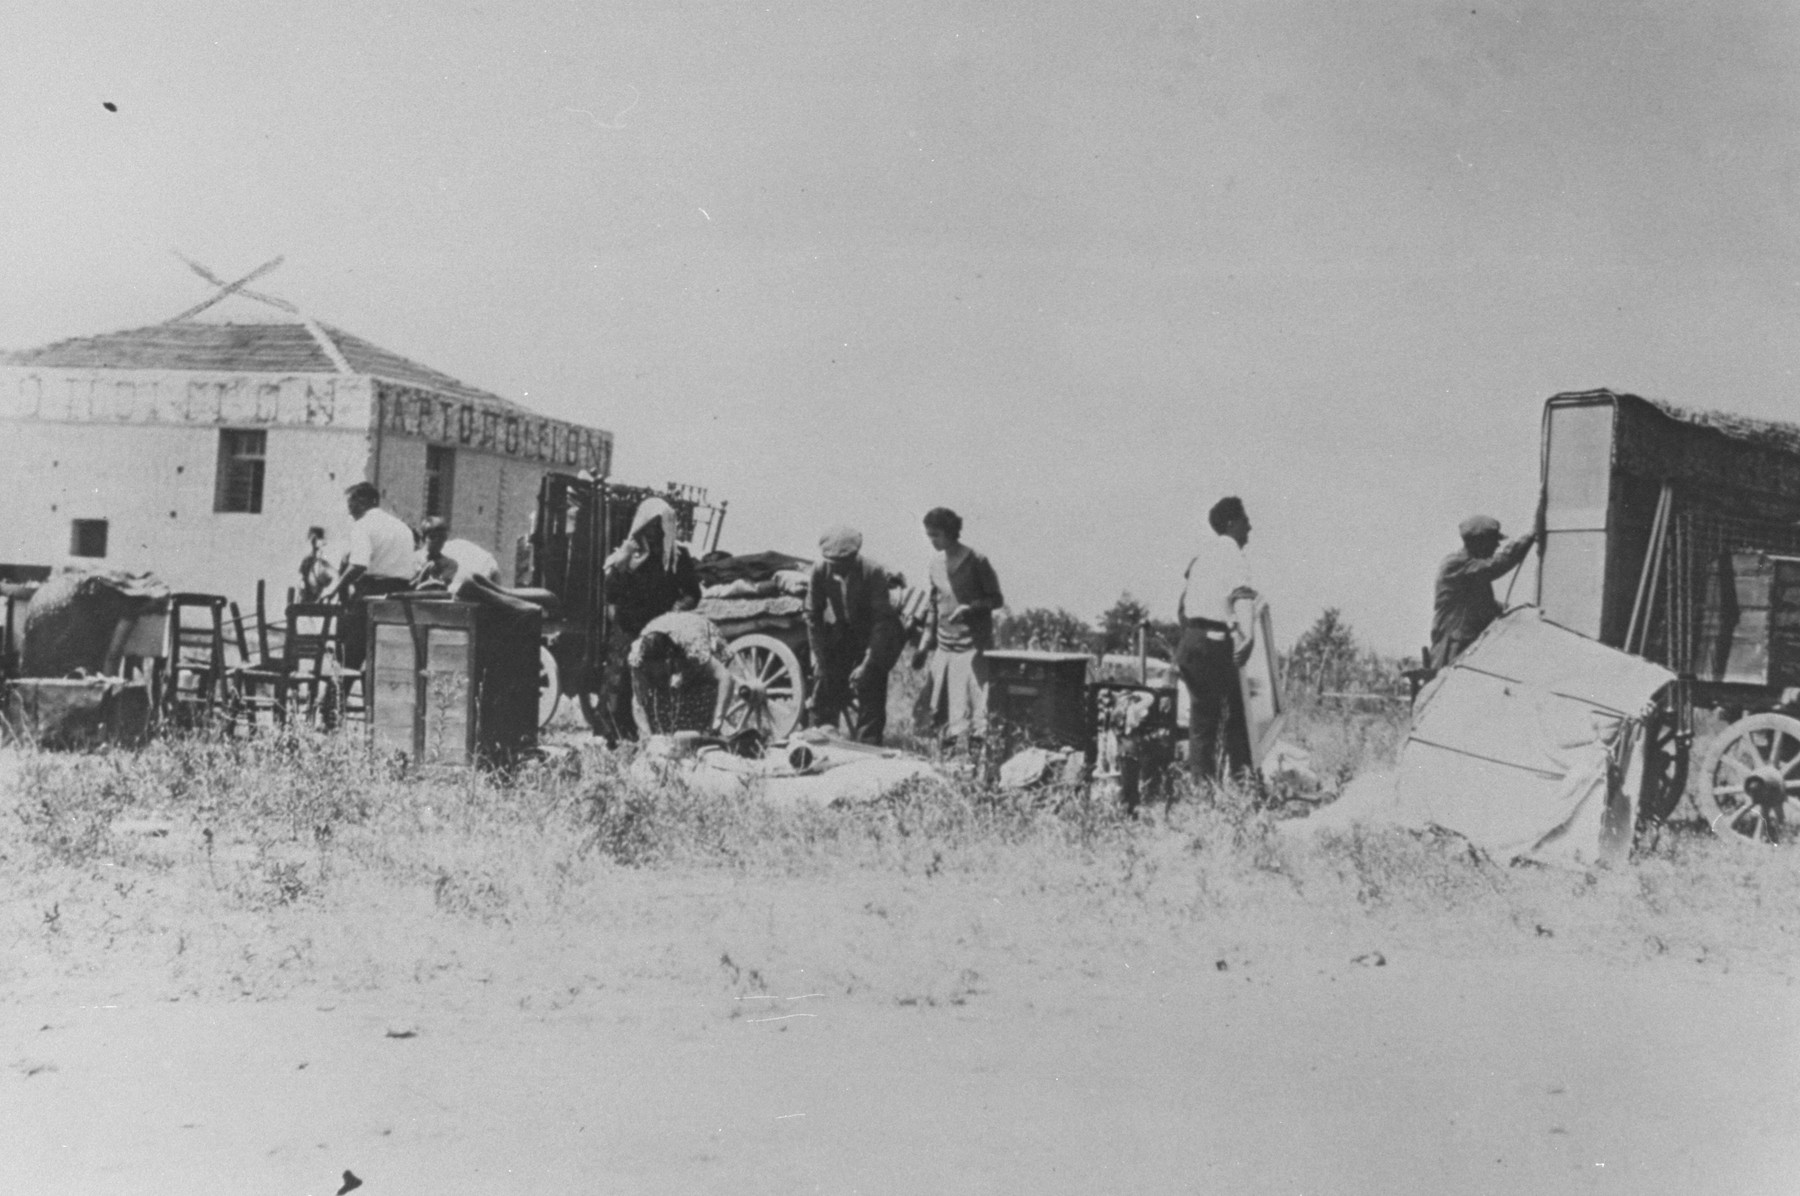 Jews evacuate Camp Campbell after the pogrom of June 29, 1931.